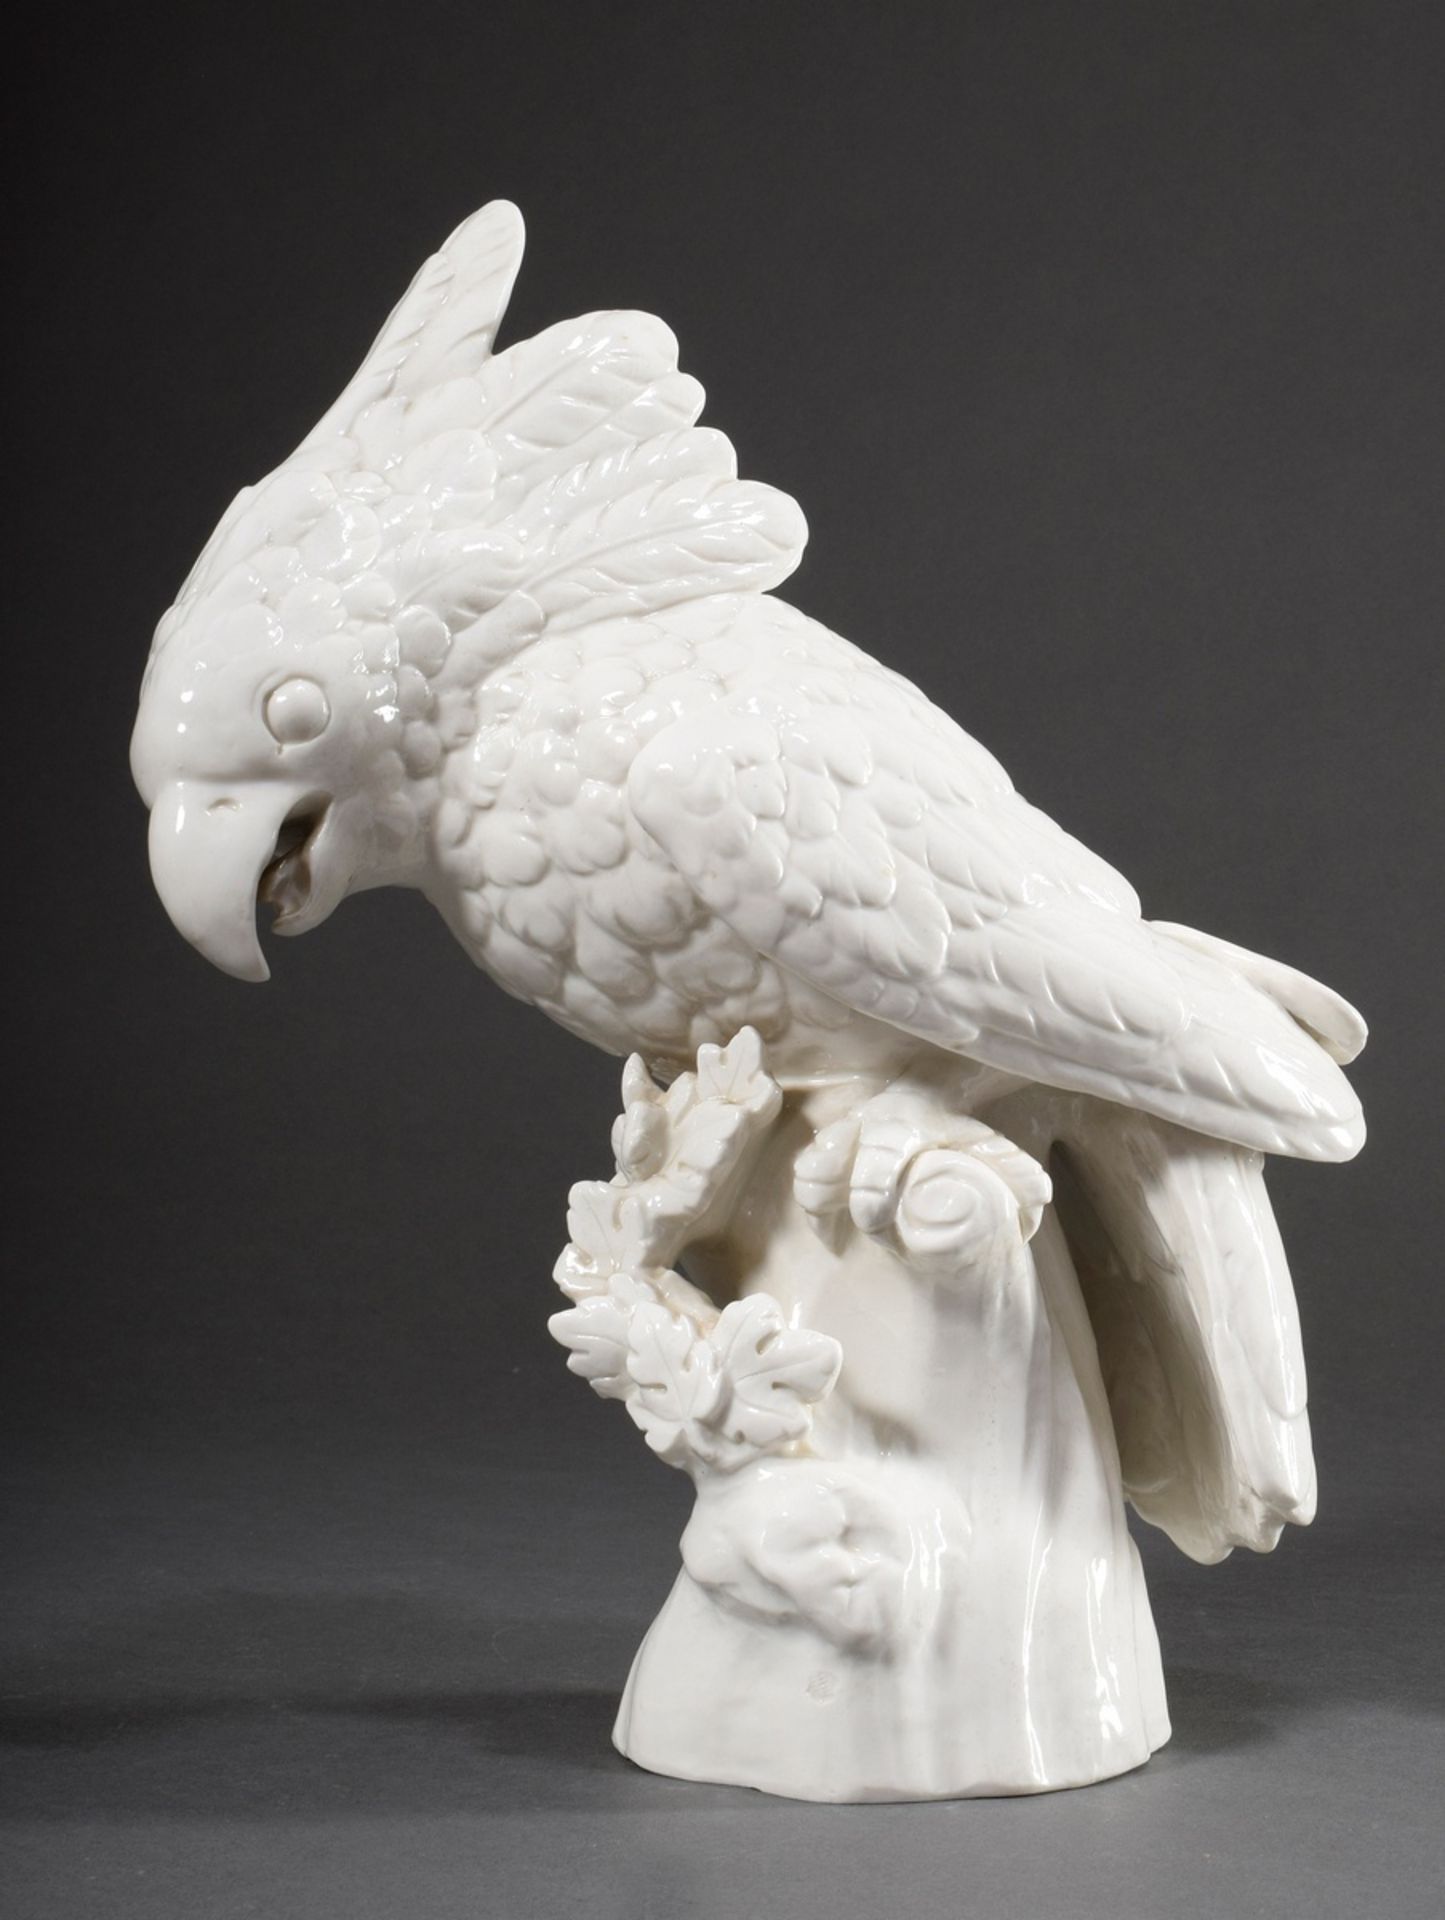 Nymphenburg "Cockatoo with closed wings", white porcelain, incised no. 448, bossier no. 3, diamond-